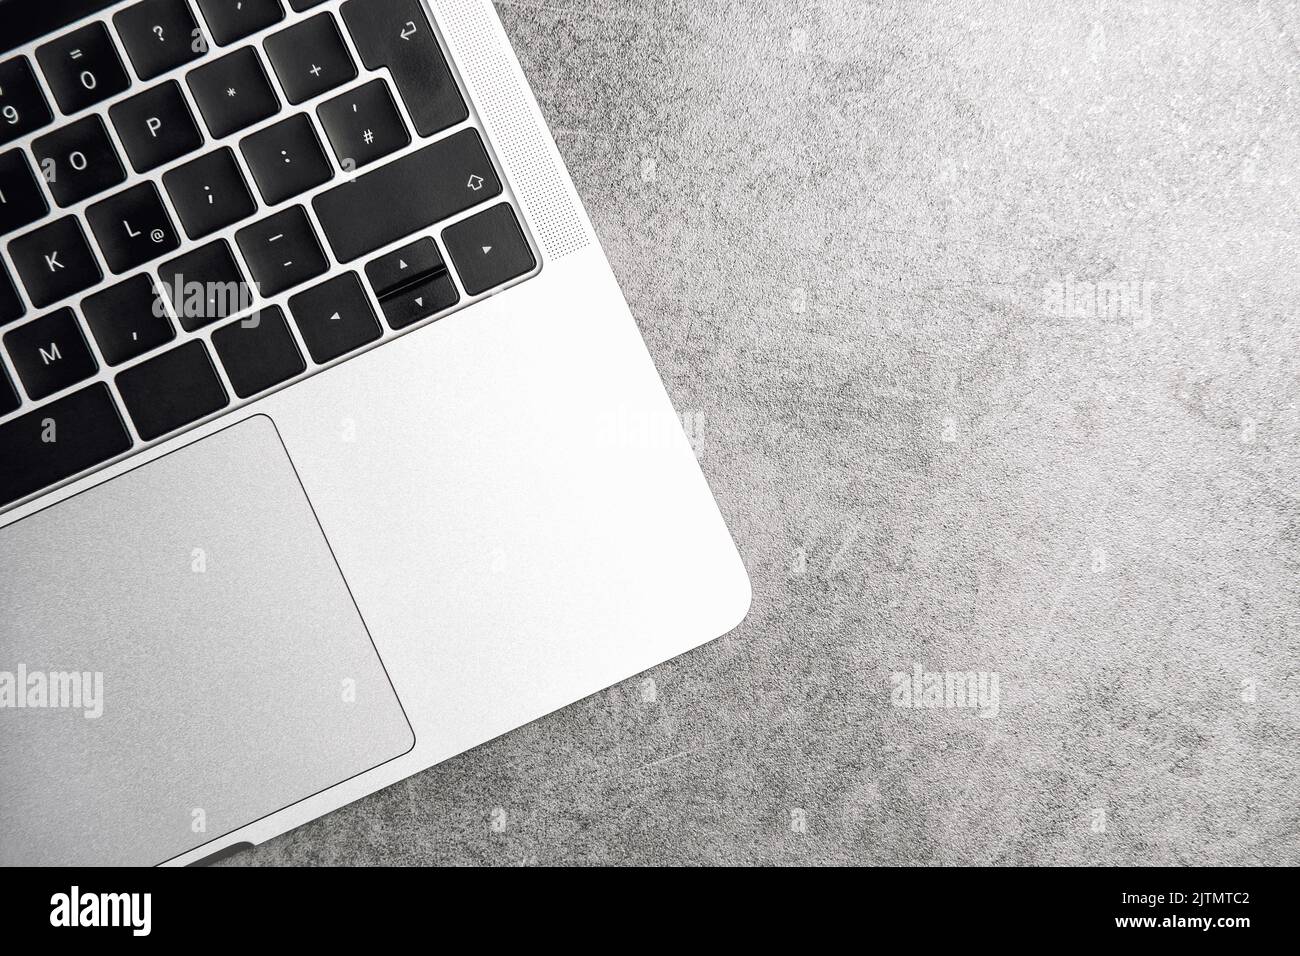 Laptop notebook keyboard on grey background. Office workspace flat lay Stock Photo